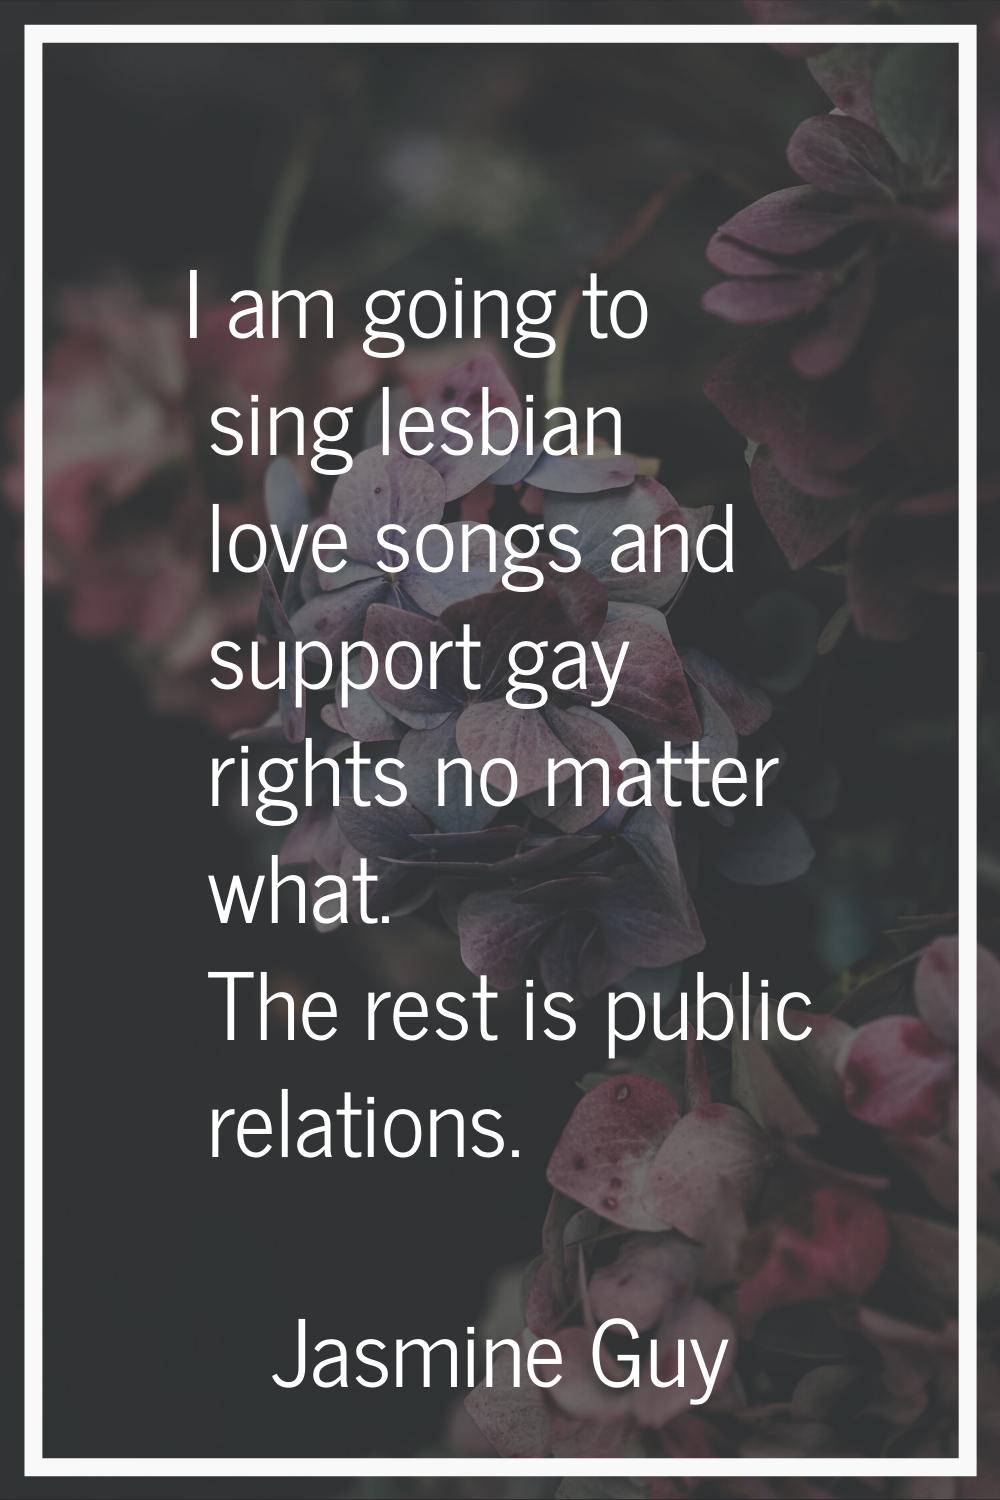 I am going to sing lesbian love songs and support gay rights no matter what. The rest is public rel